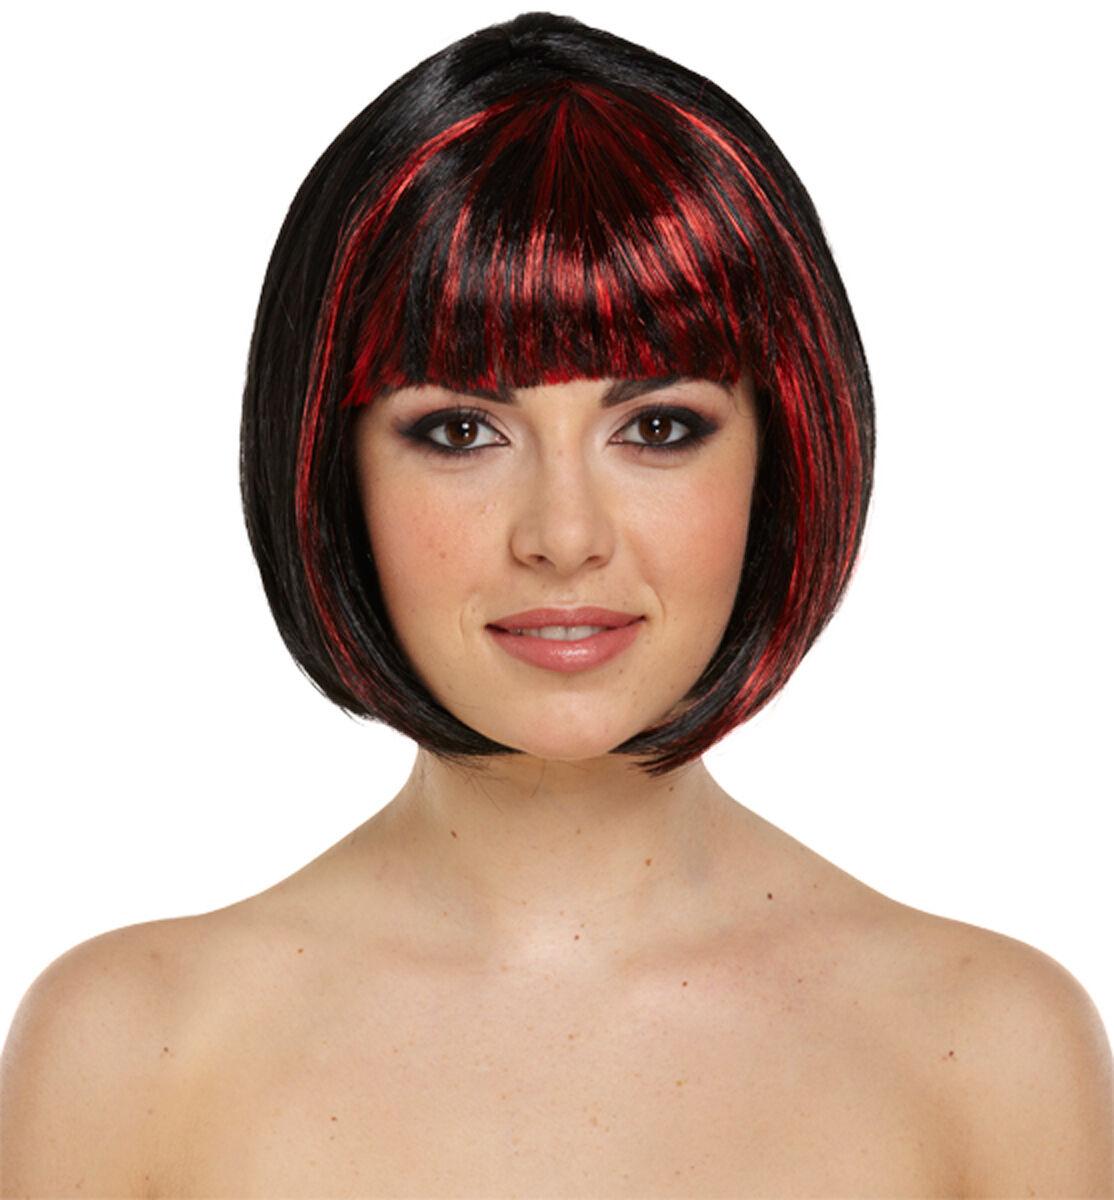 HALLOWEEN LADIES GIRLS BLACK RED SHORT BOB WIG HAIR FANCY DRESS OUTFIT ACCESSORY - Labreeze